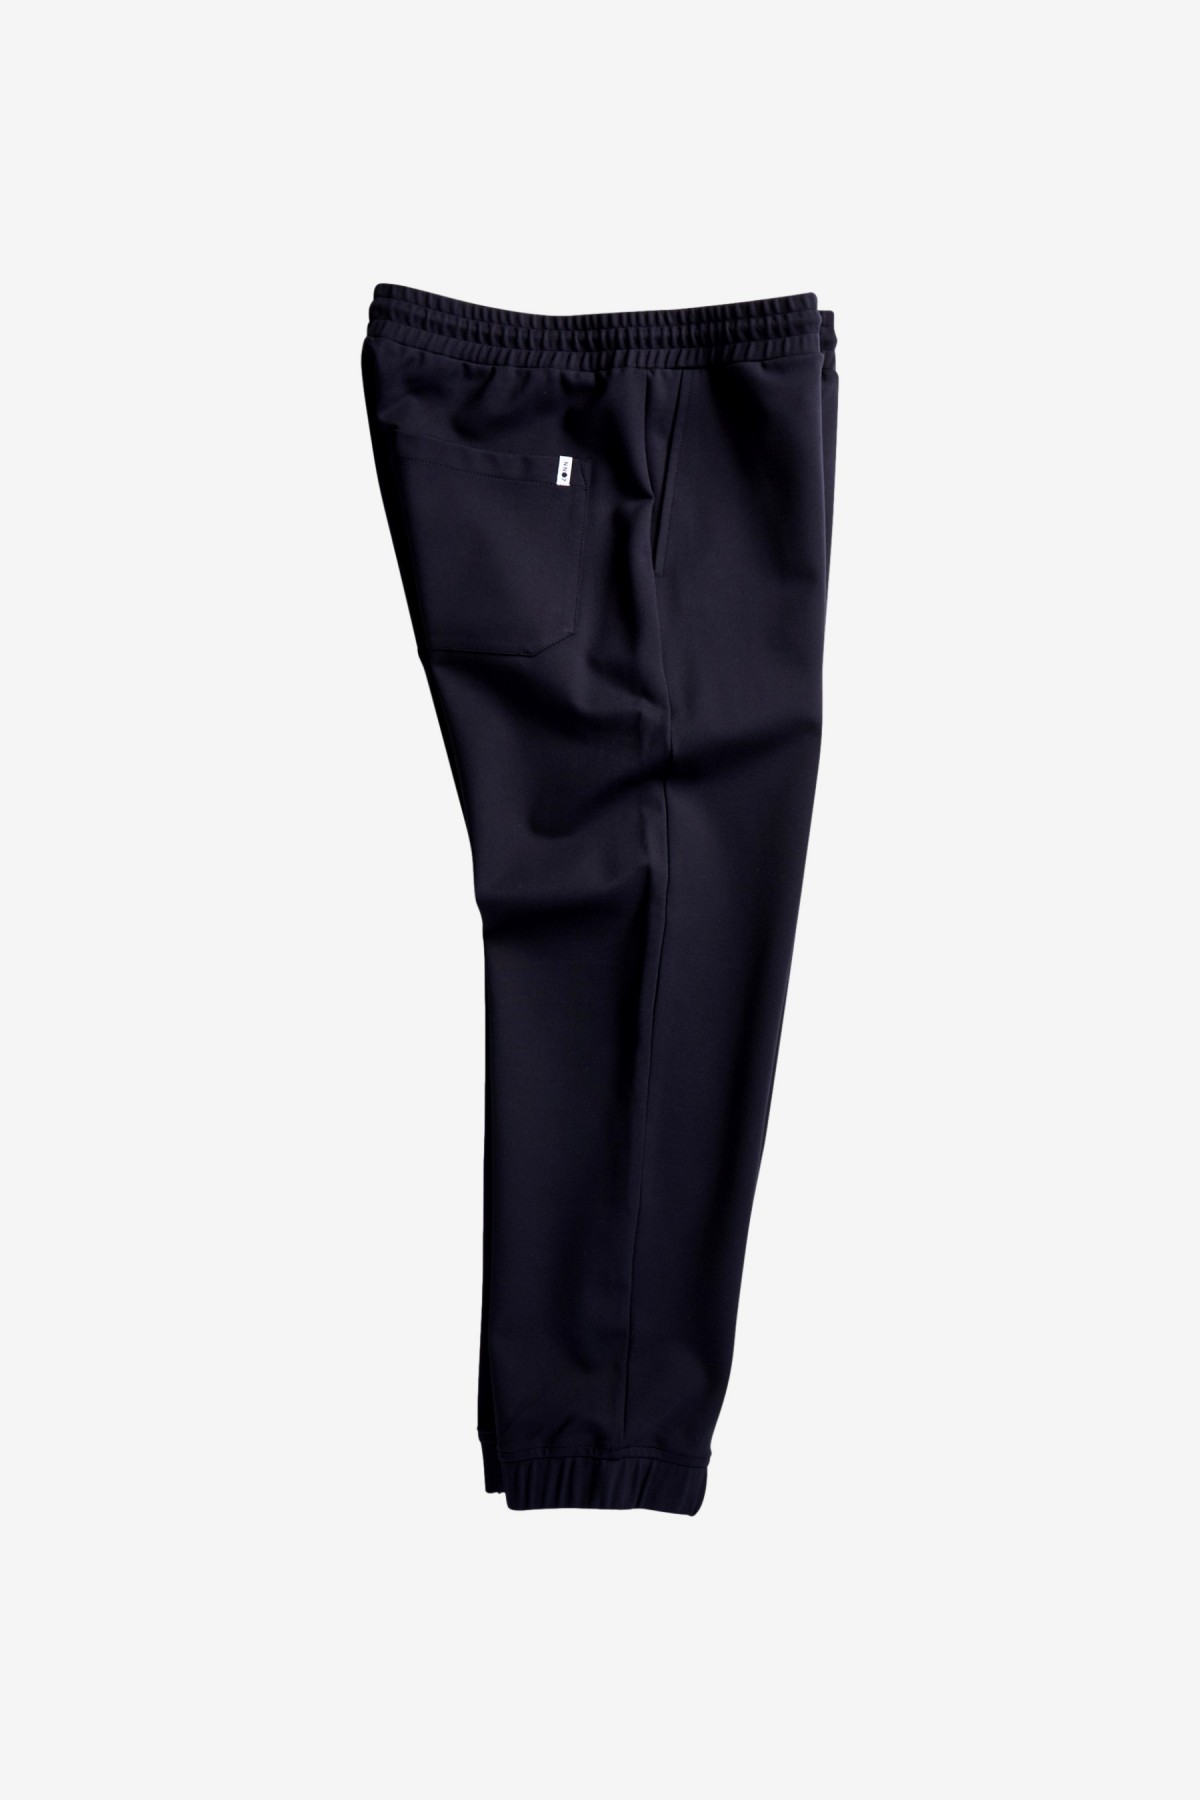 NN07 Fred Track pant 3466 in Navy Blue